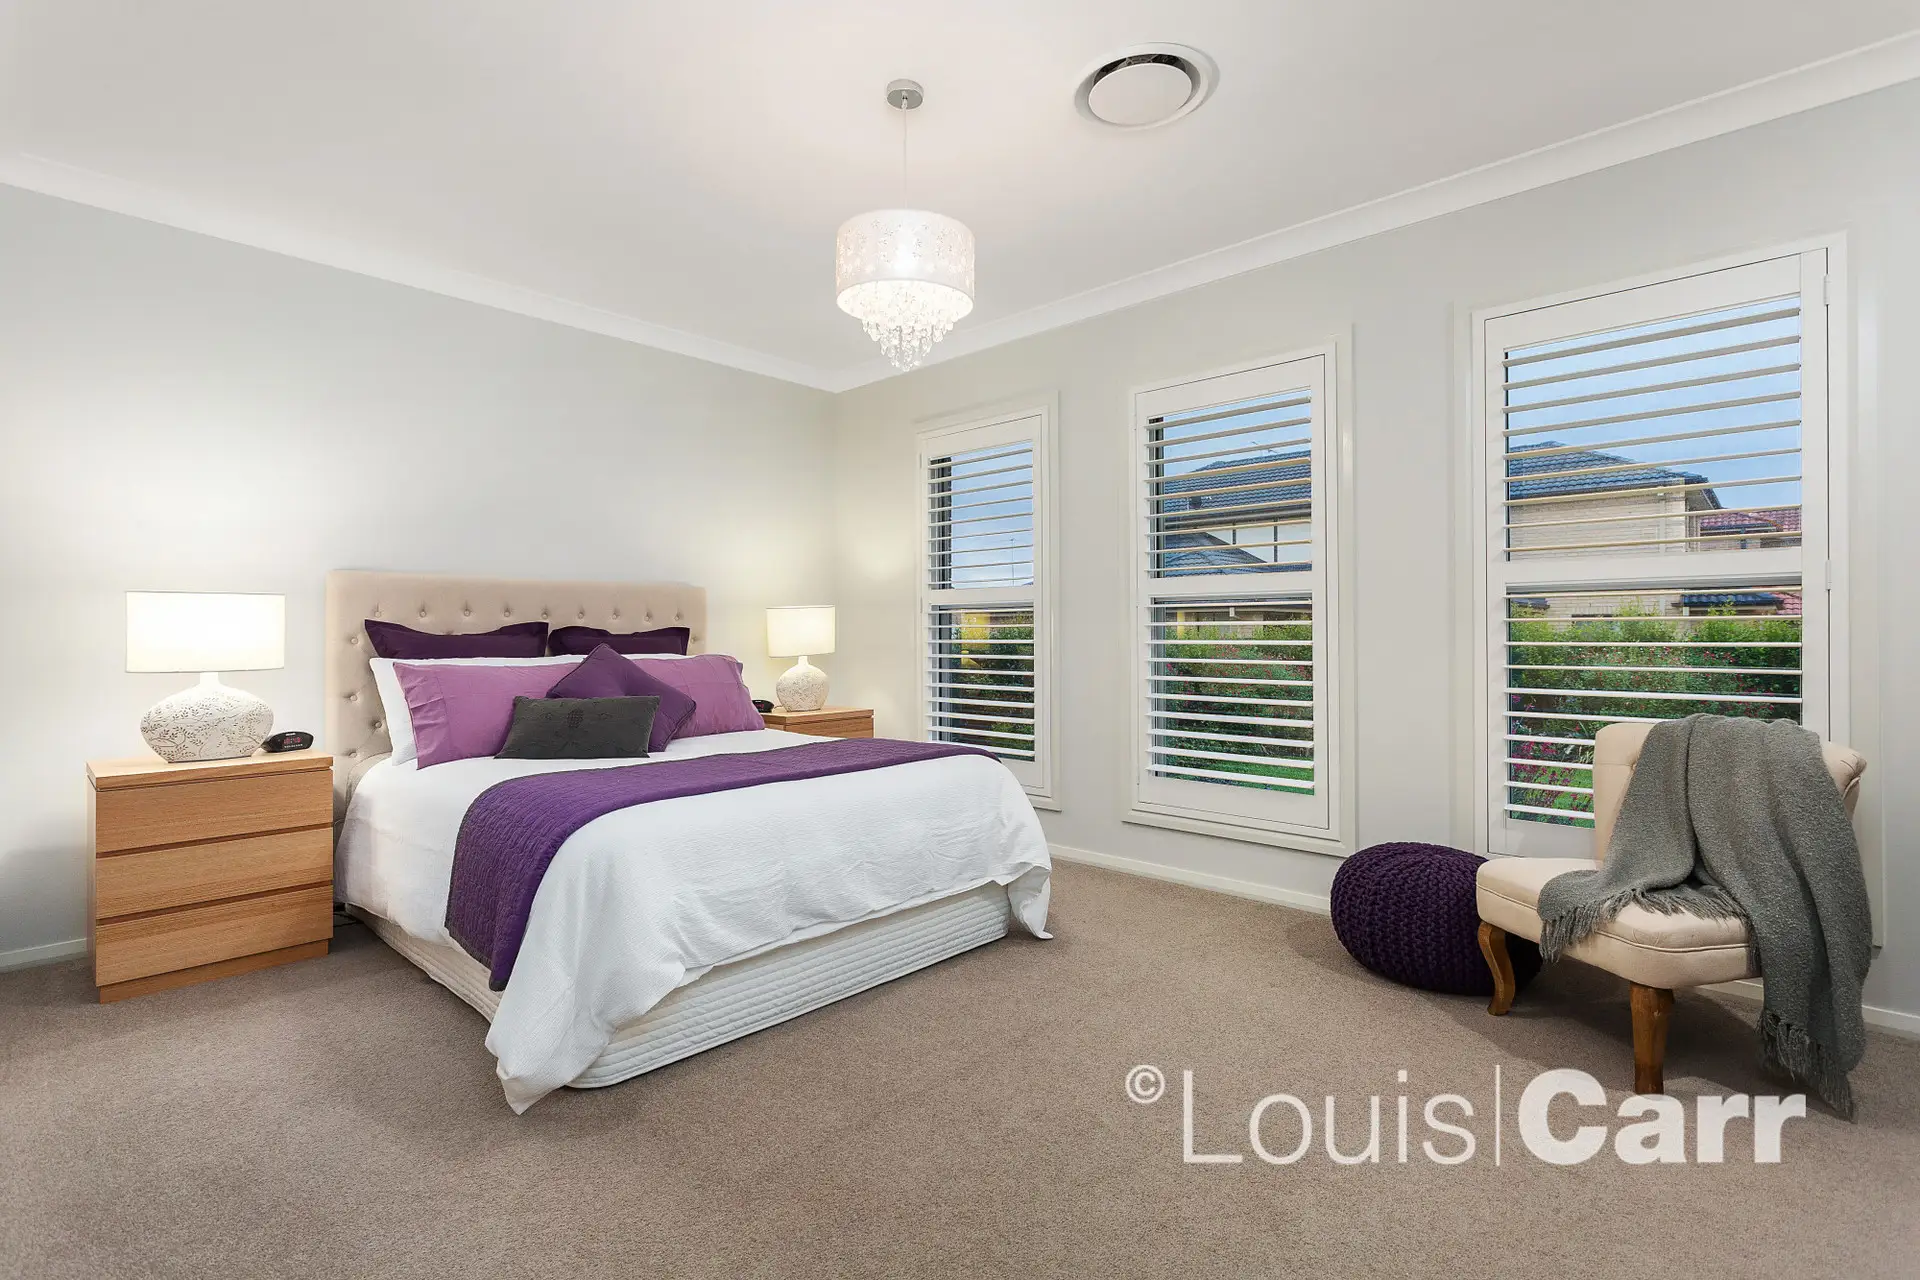 Photo #7: 9 Galvin Avenue, Kellyville - Sold by Louis Carr Real Estate